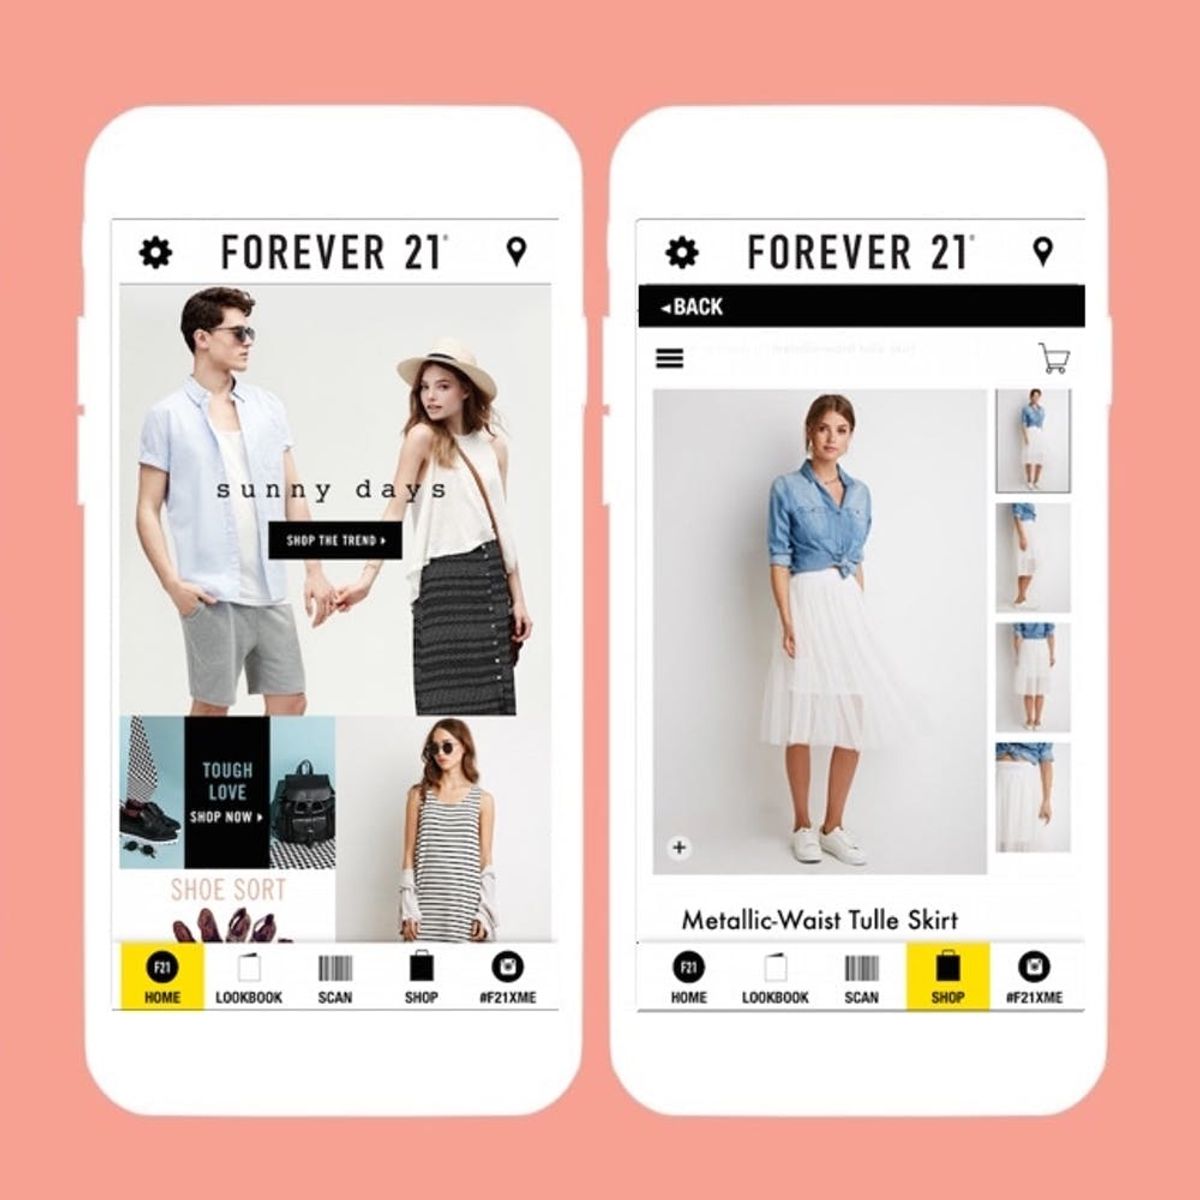 The Top 8 Most Popular Shopping Apps for Millennials